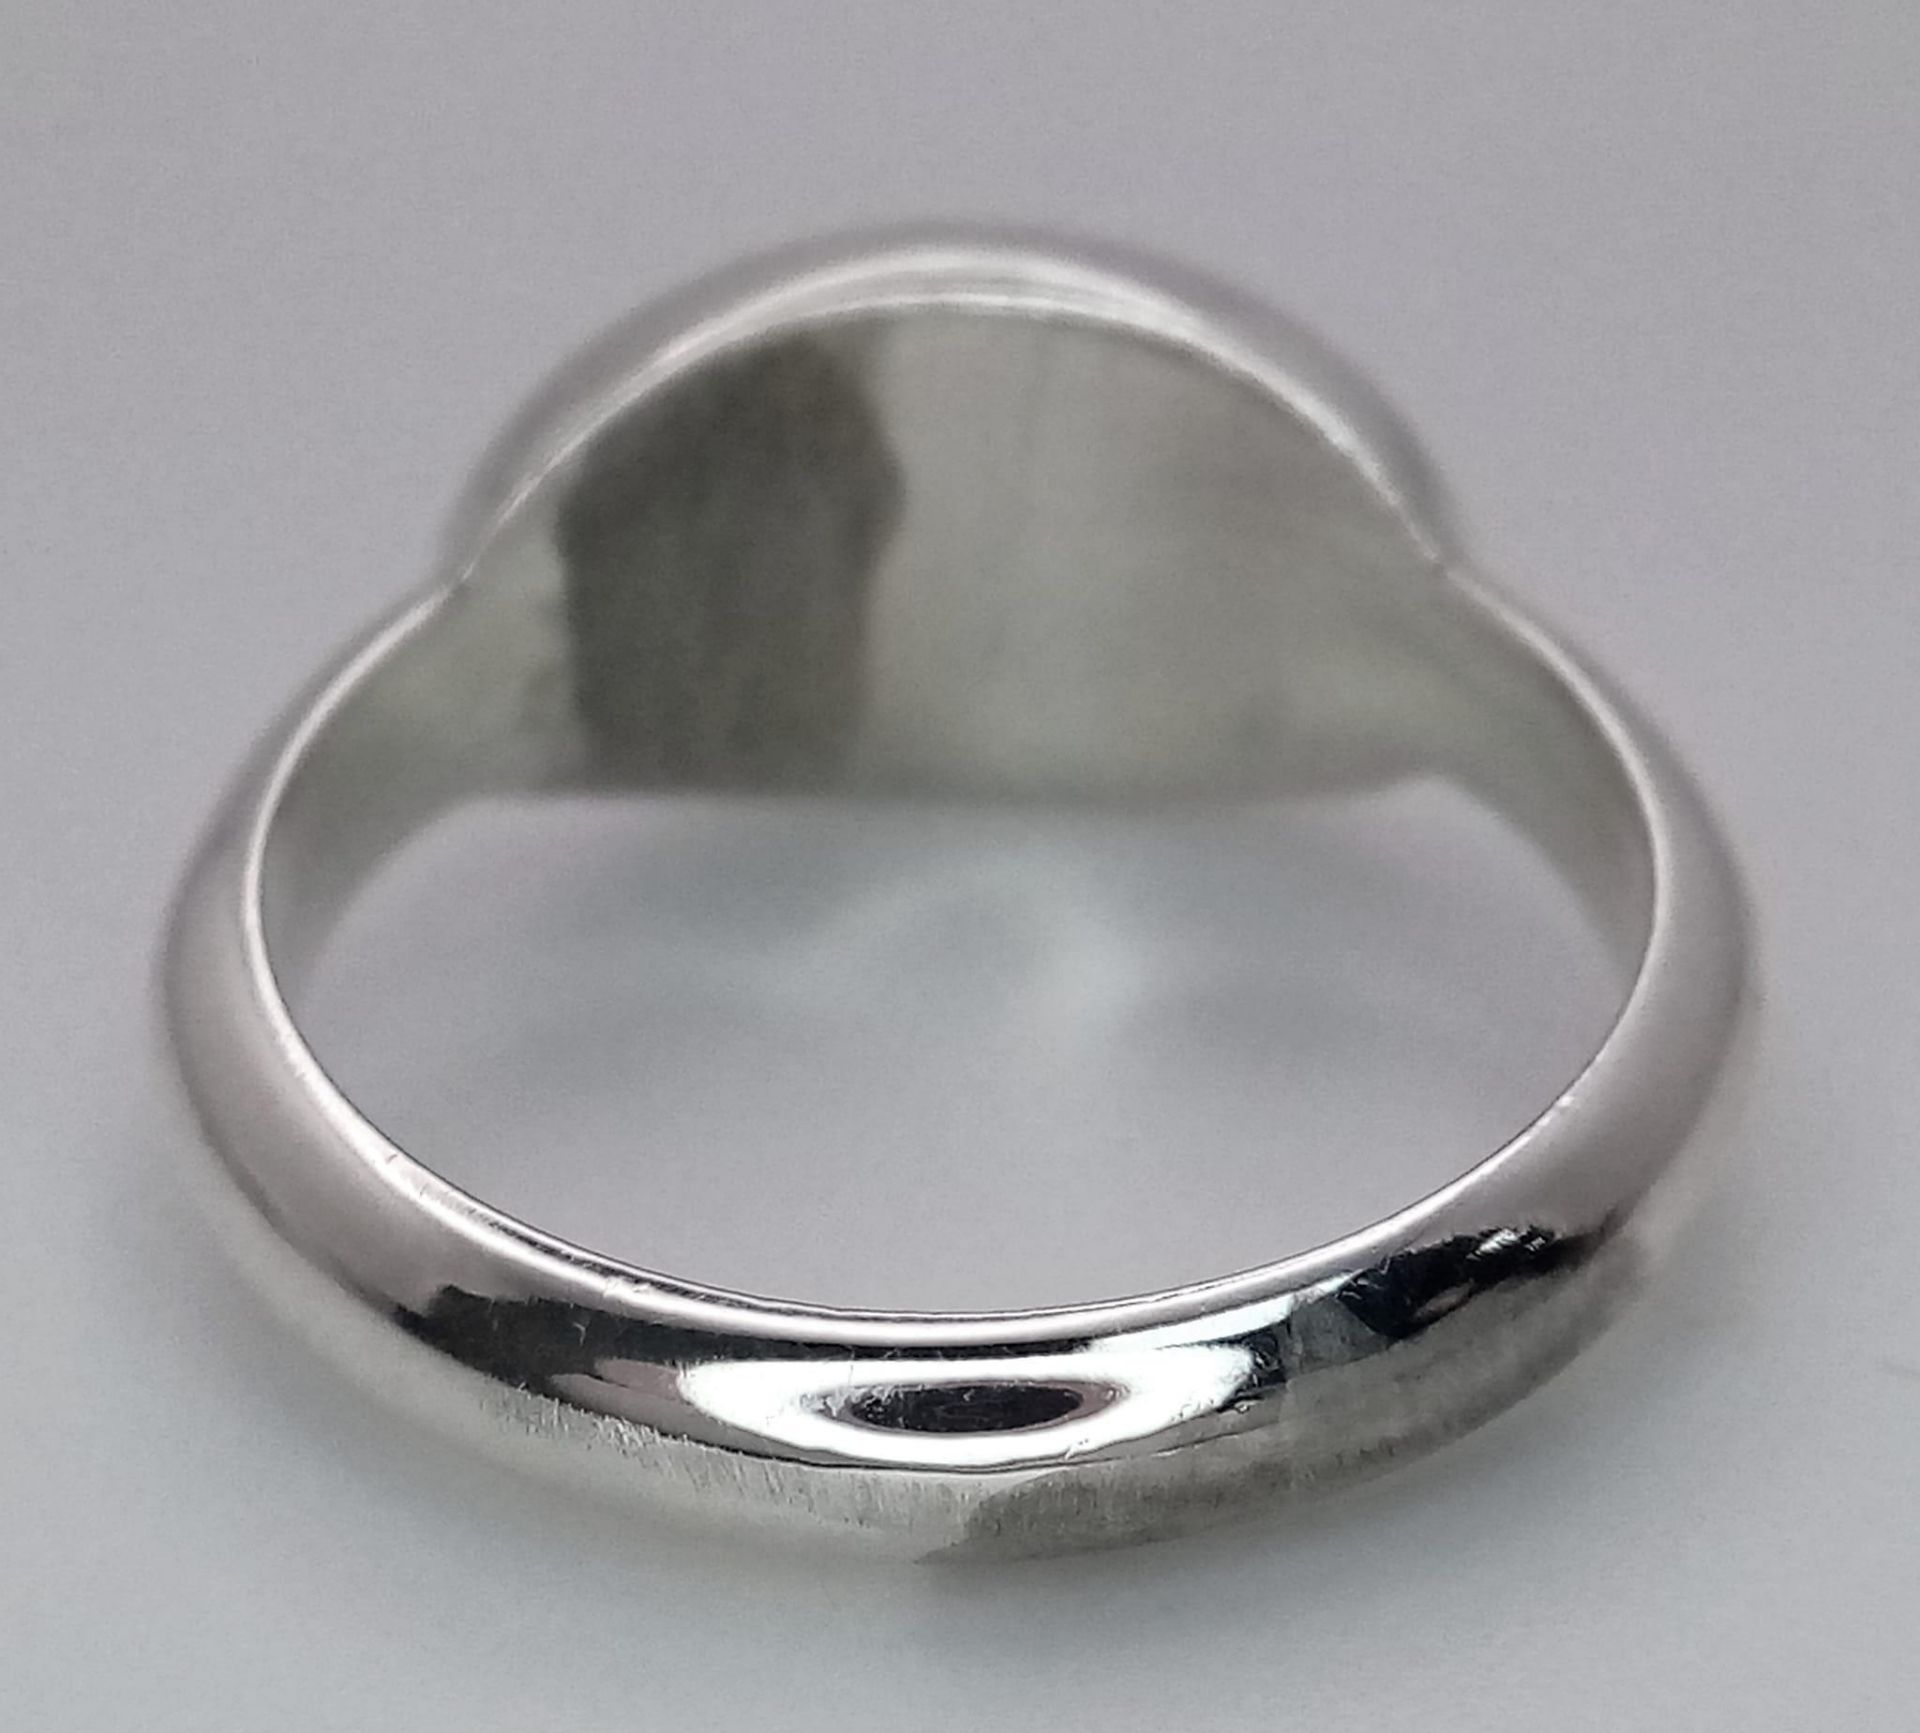 A Please Return to Tiffany & Co. Silver Signet Ring. Comes with a Tiffany pouch. Size O. Ref: 016081 - Image 3 of 4